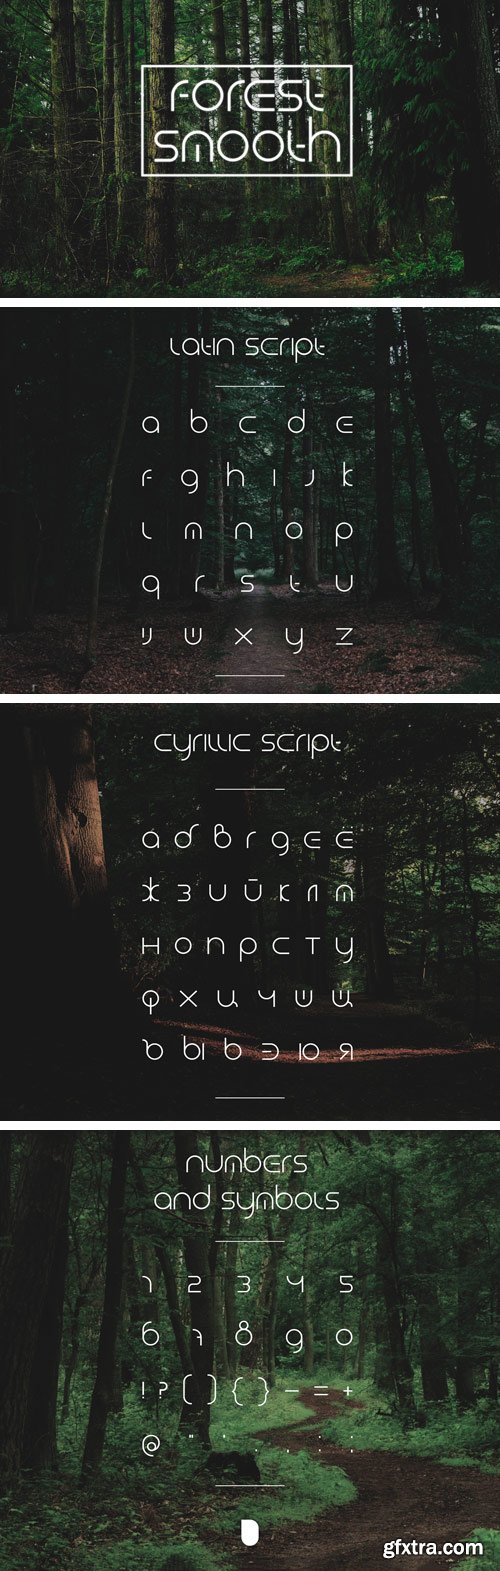 ForestSmooth Typeface